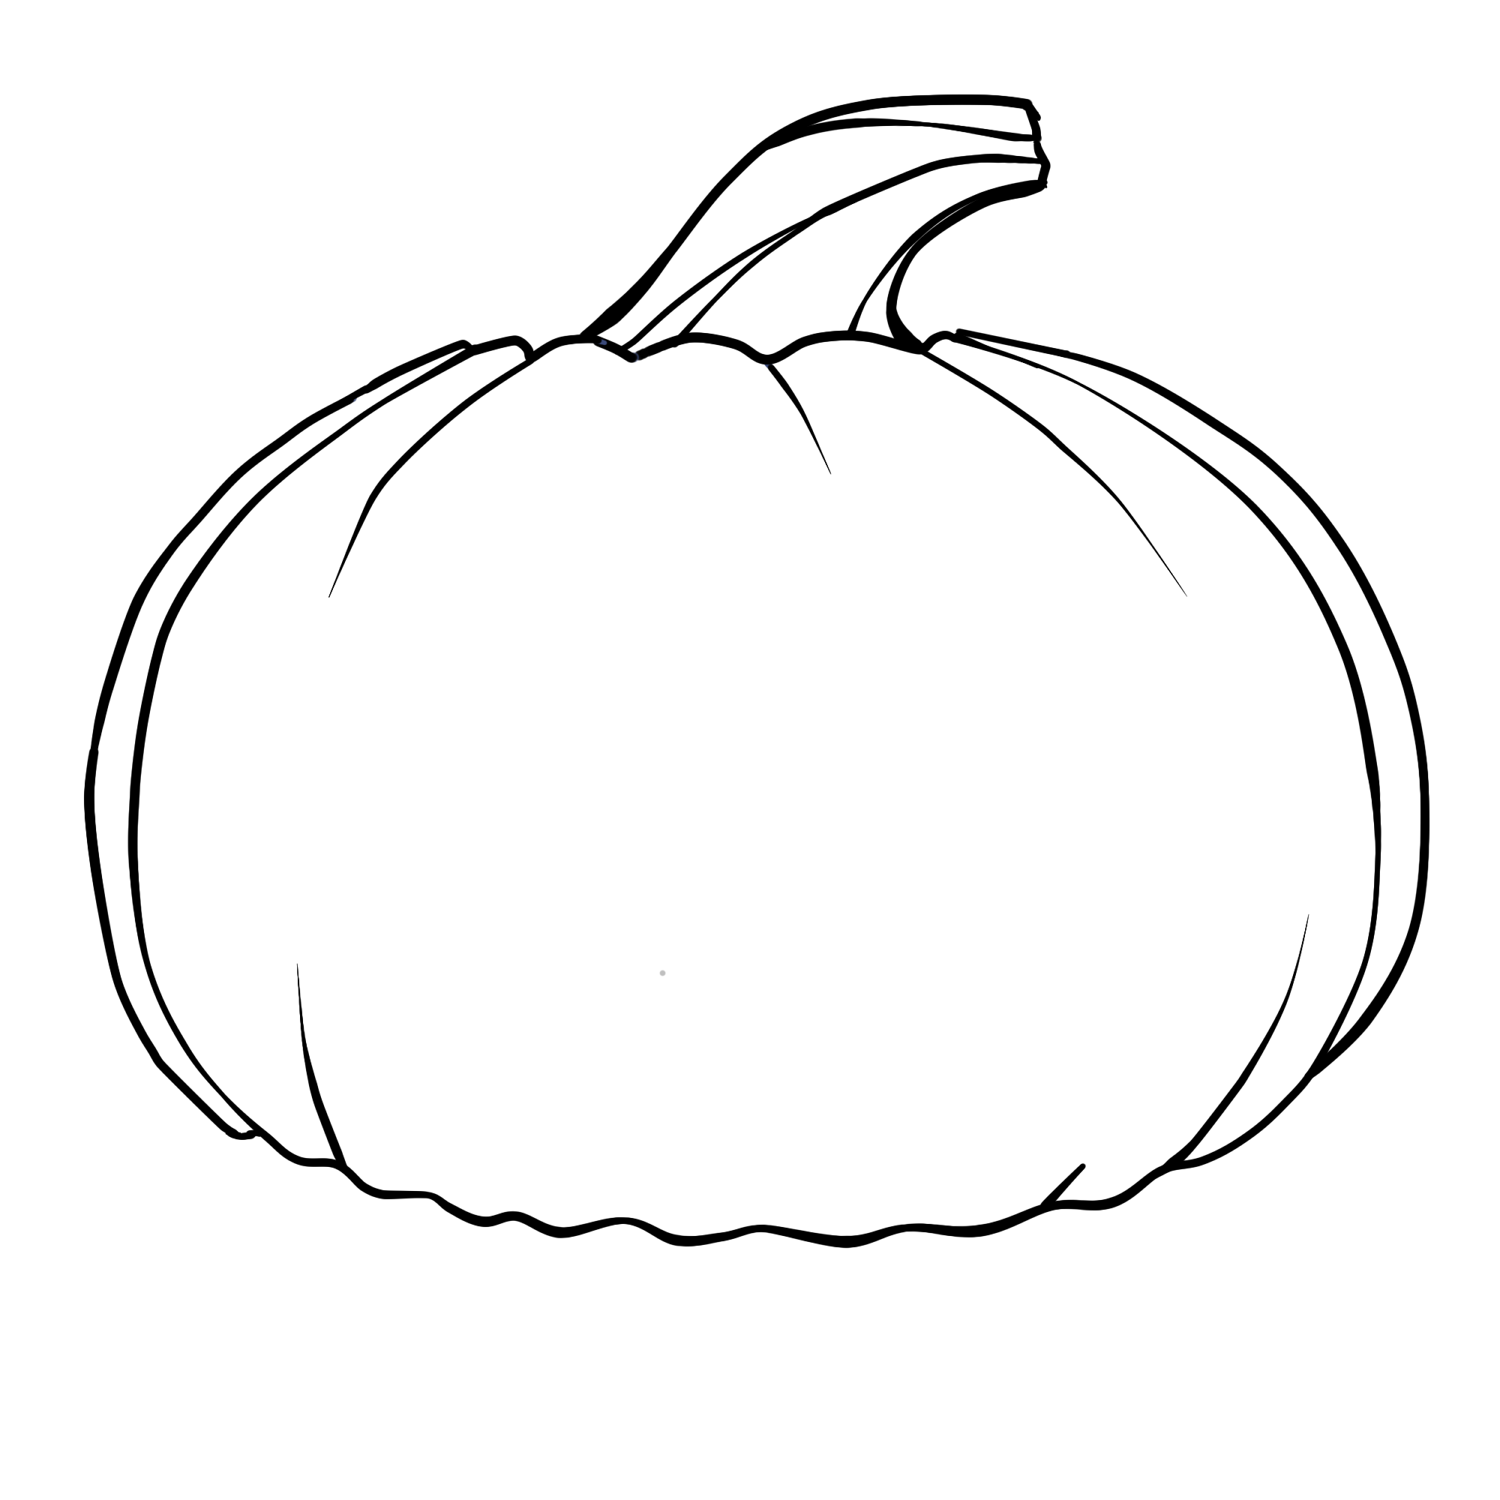 Coloring Page Of A Pumpkin | Coloring Pages for Kids and for Adults